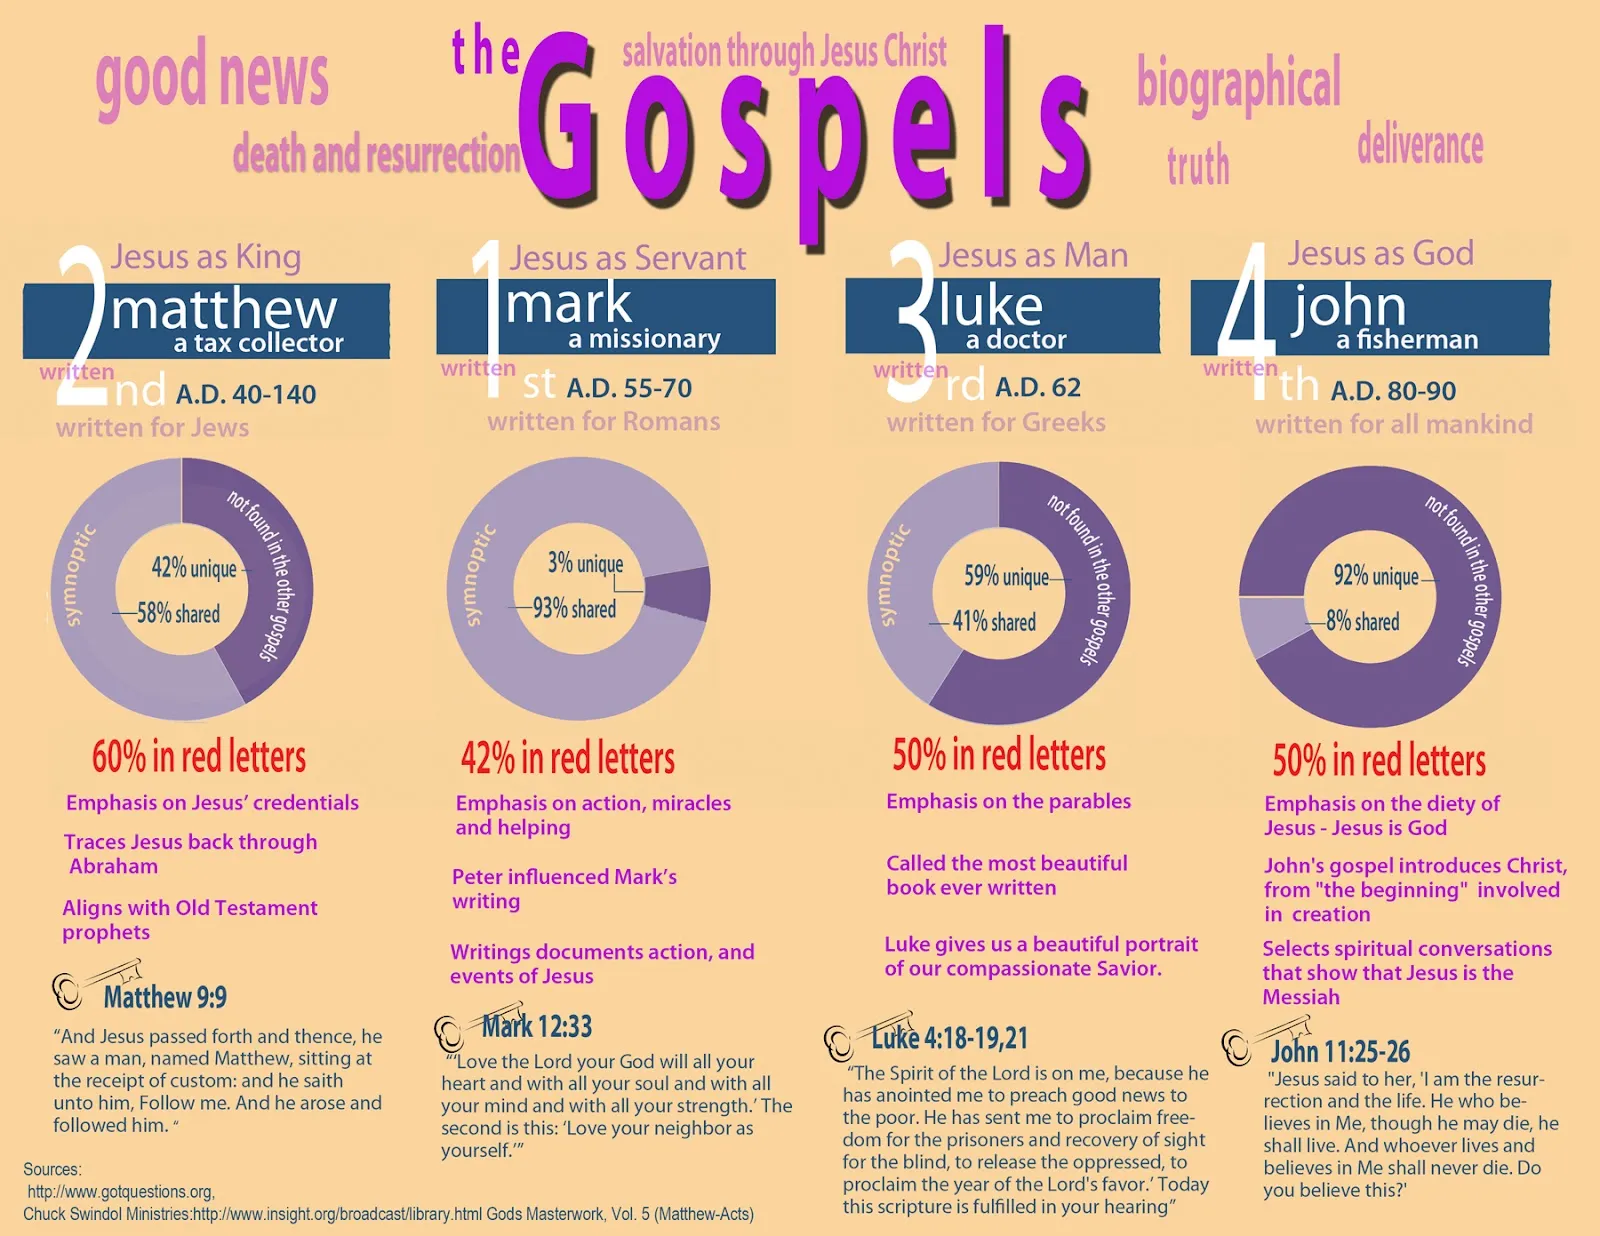 difference between the bible and the gospel